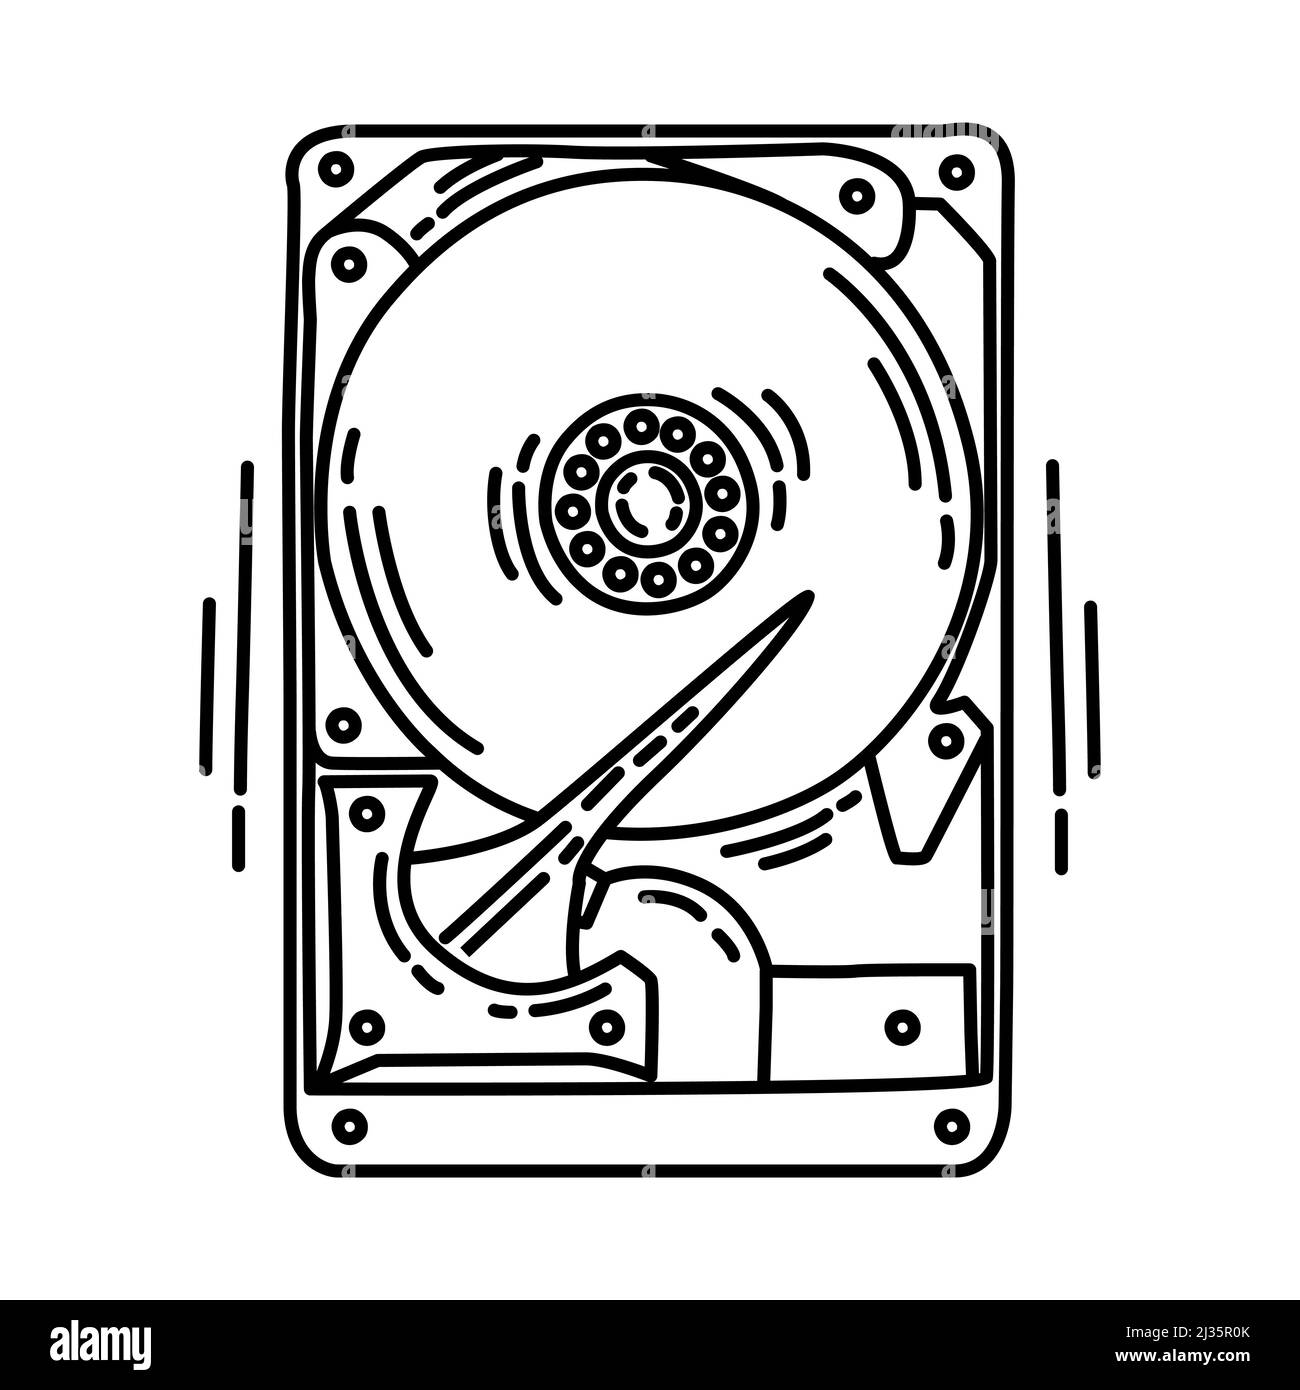 Hardisk Drive Part of Computer and Hardware Hand Drawn Icon Set Vector. Stock Vector